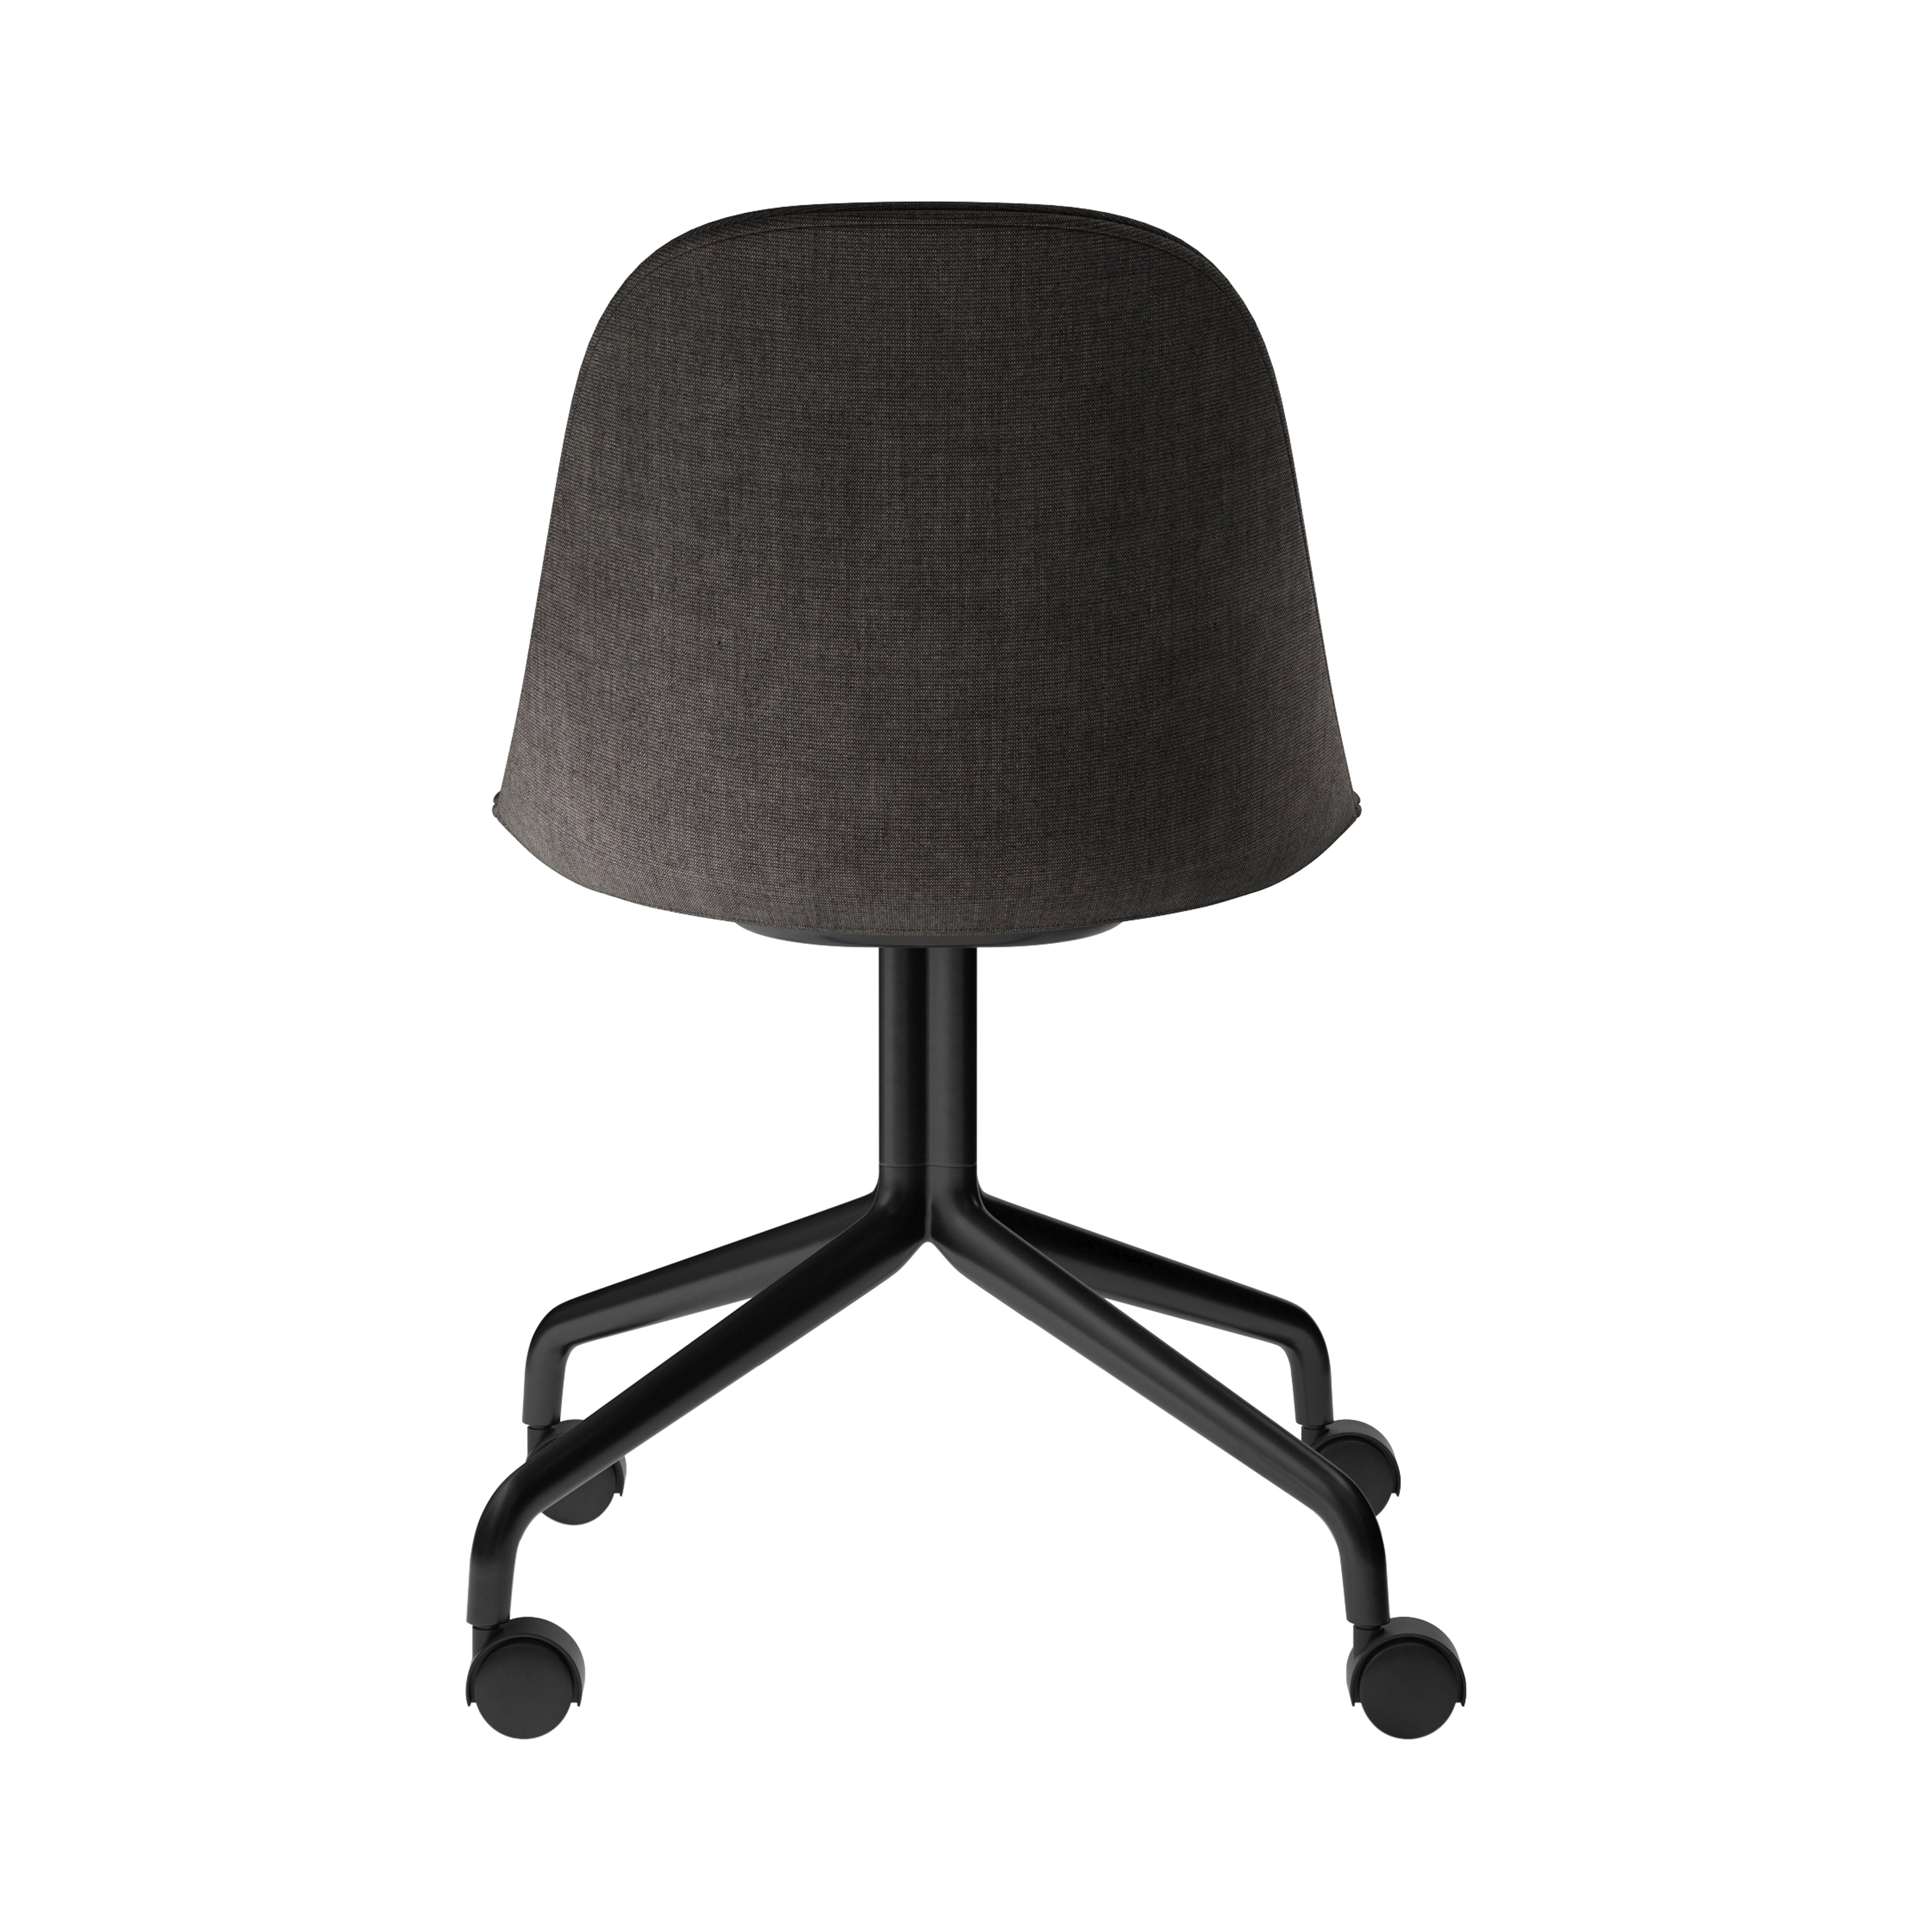 Harbour Swivel Side Chair with Casters: Upholstered + Black Steel